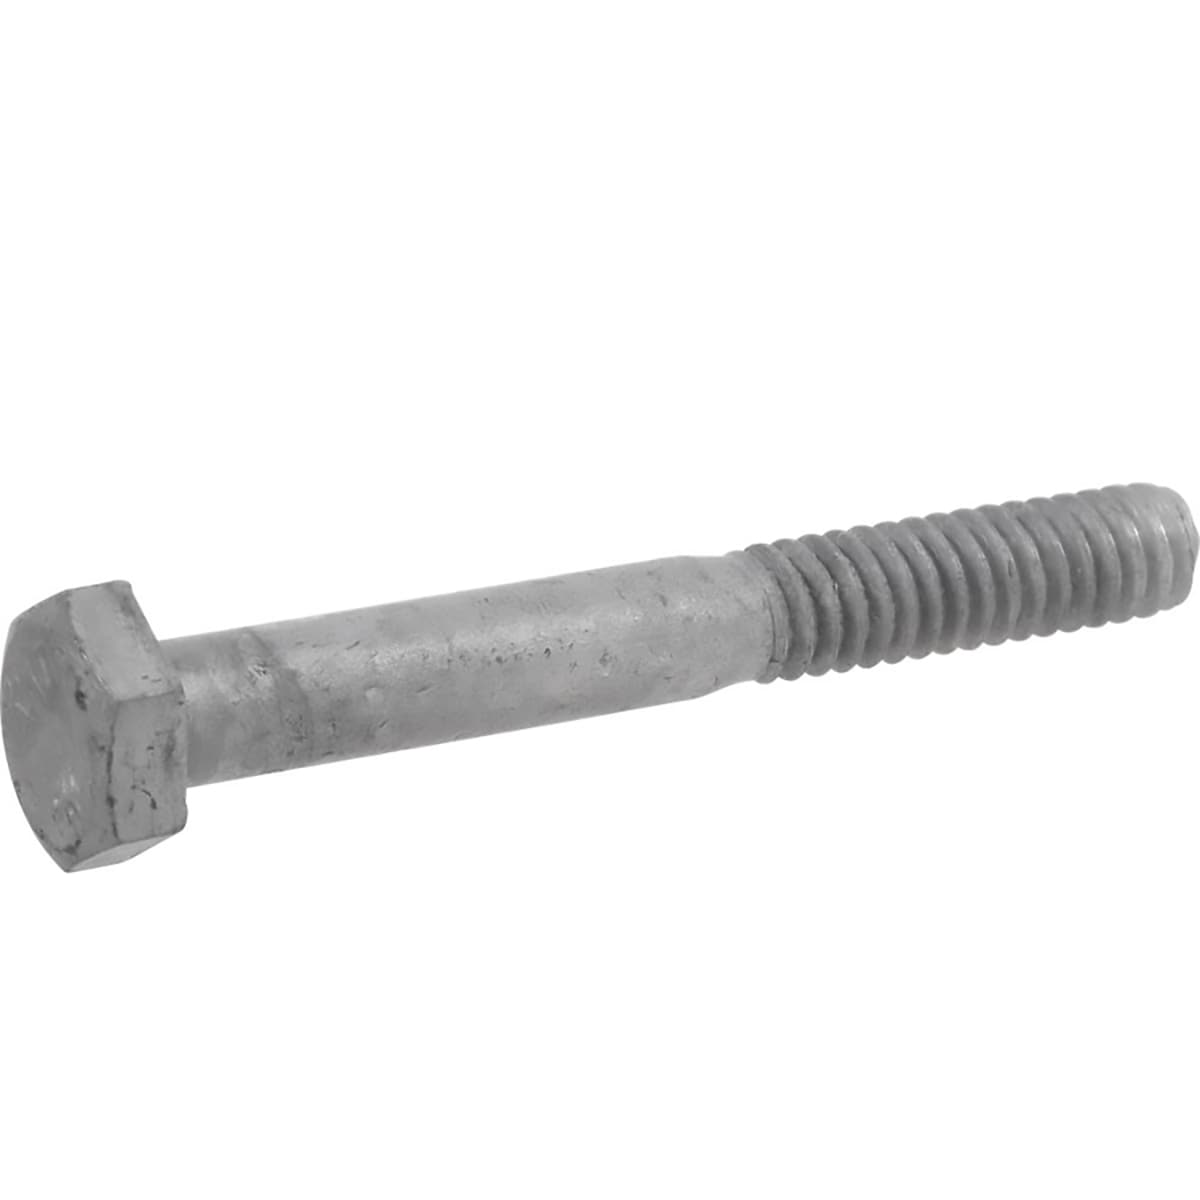 18-8 304 Grade All Sizes & Qty's 3/4-10 Stainless Steel Hex Cap Screw Bolt 